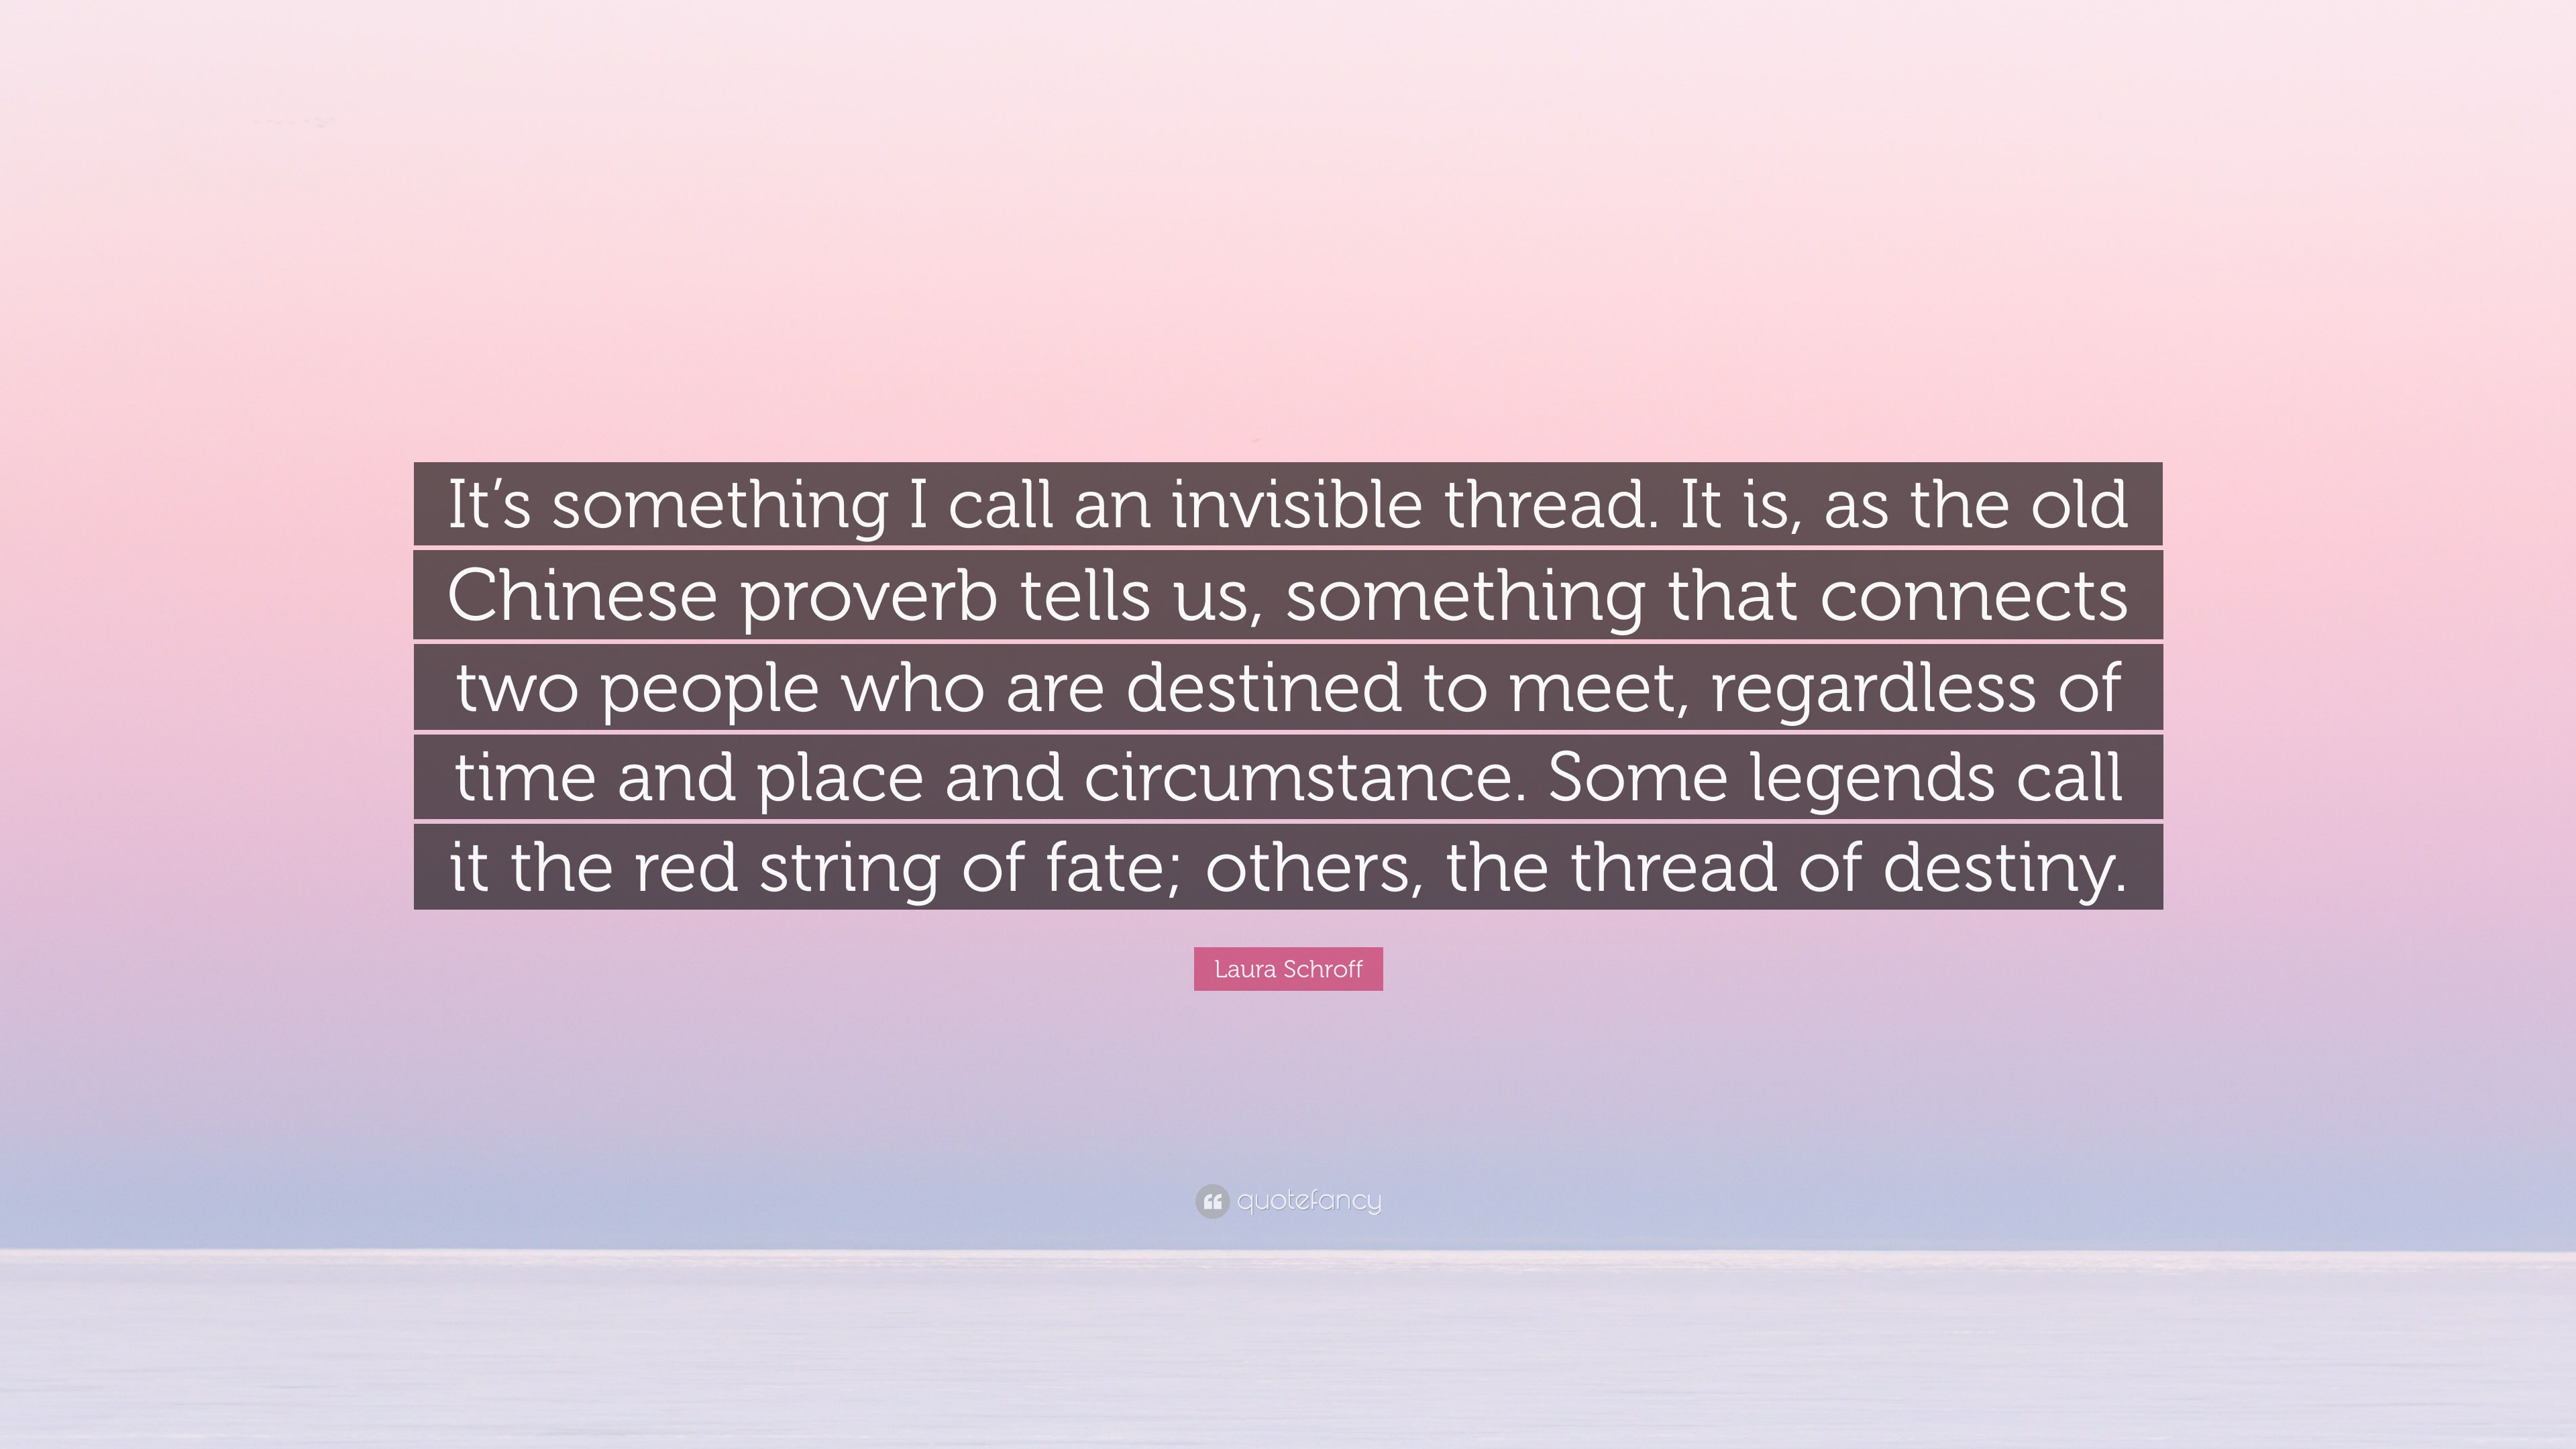 https://quotefancy.com/media/wallpaper/3840x2160/7770851-Laura-Schroff-Quote-It-s-something-I-call-an-invisible-thread-It.jpg